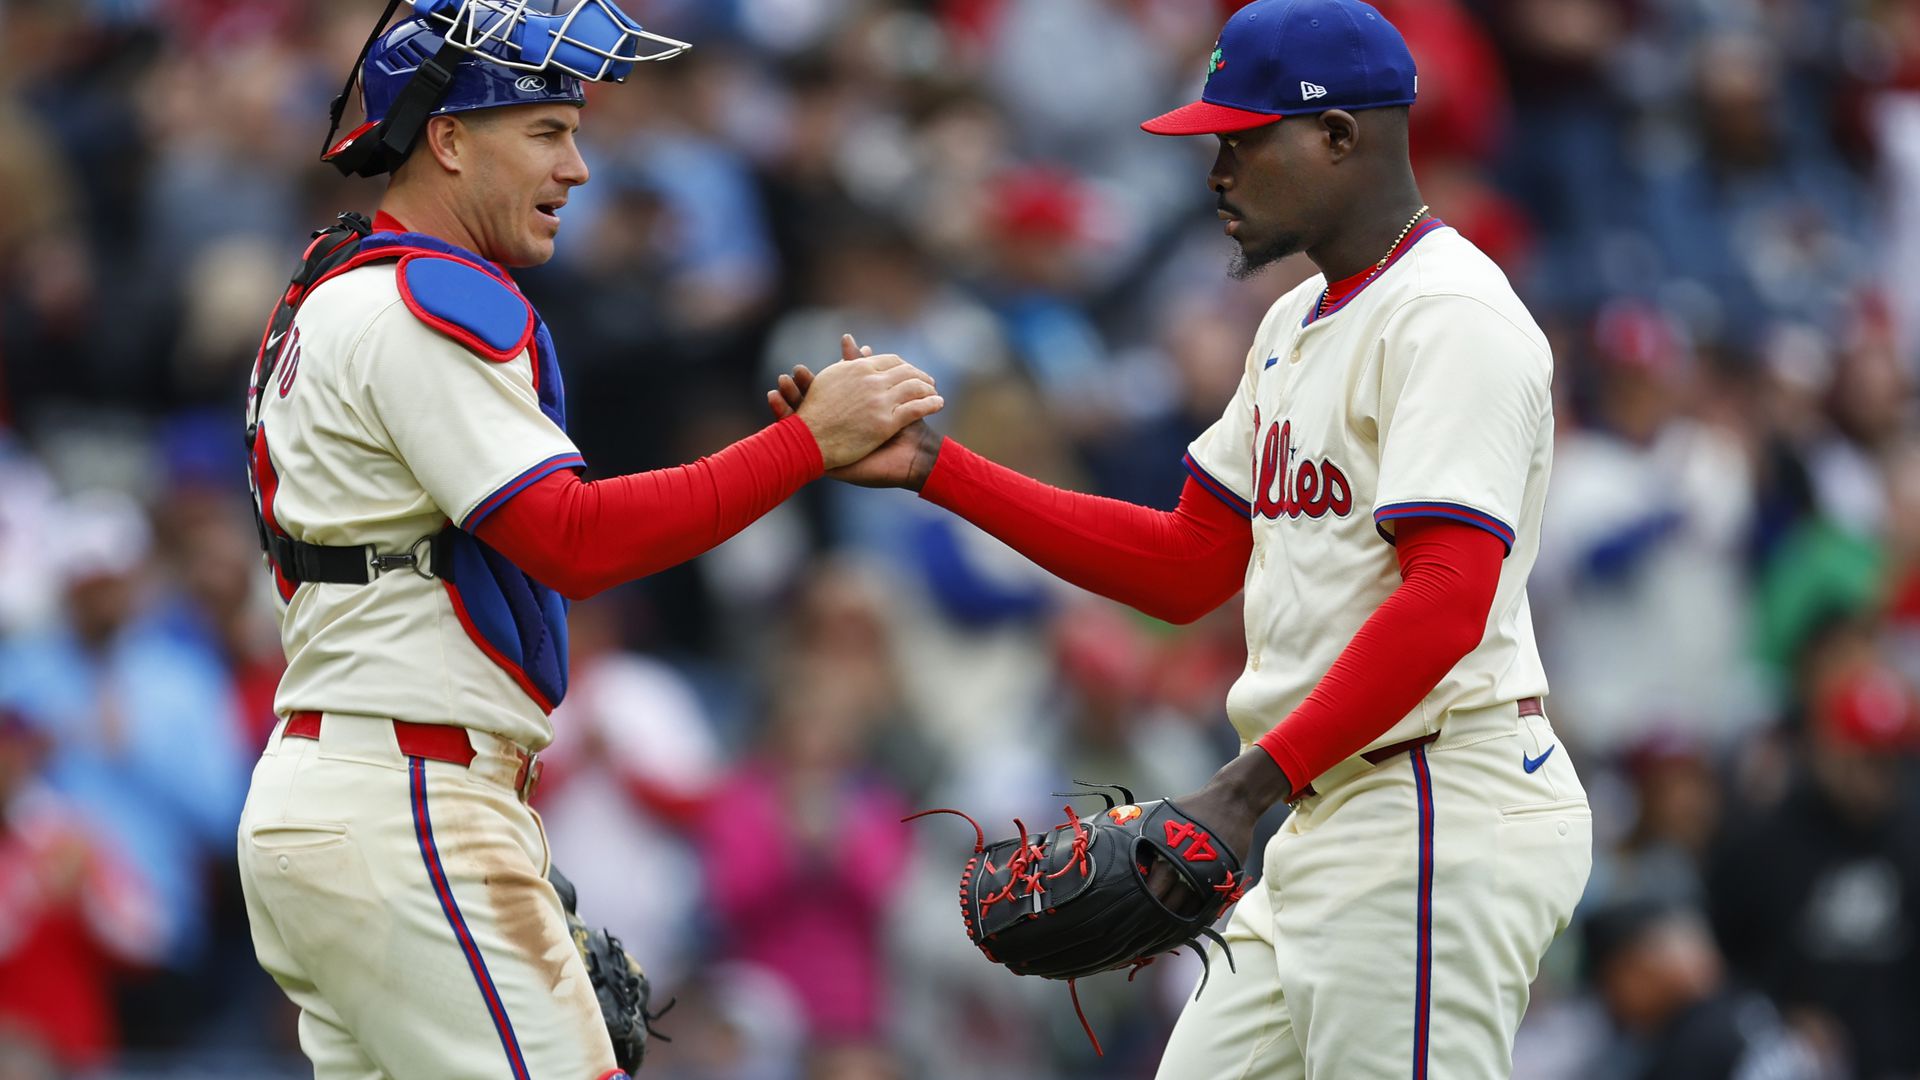 the phillies did what they had to do against the rockies and white sox